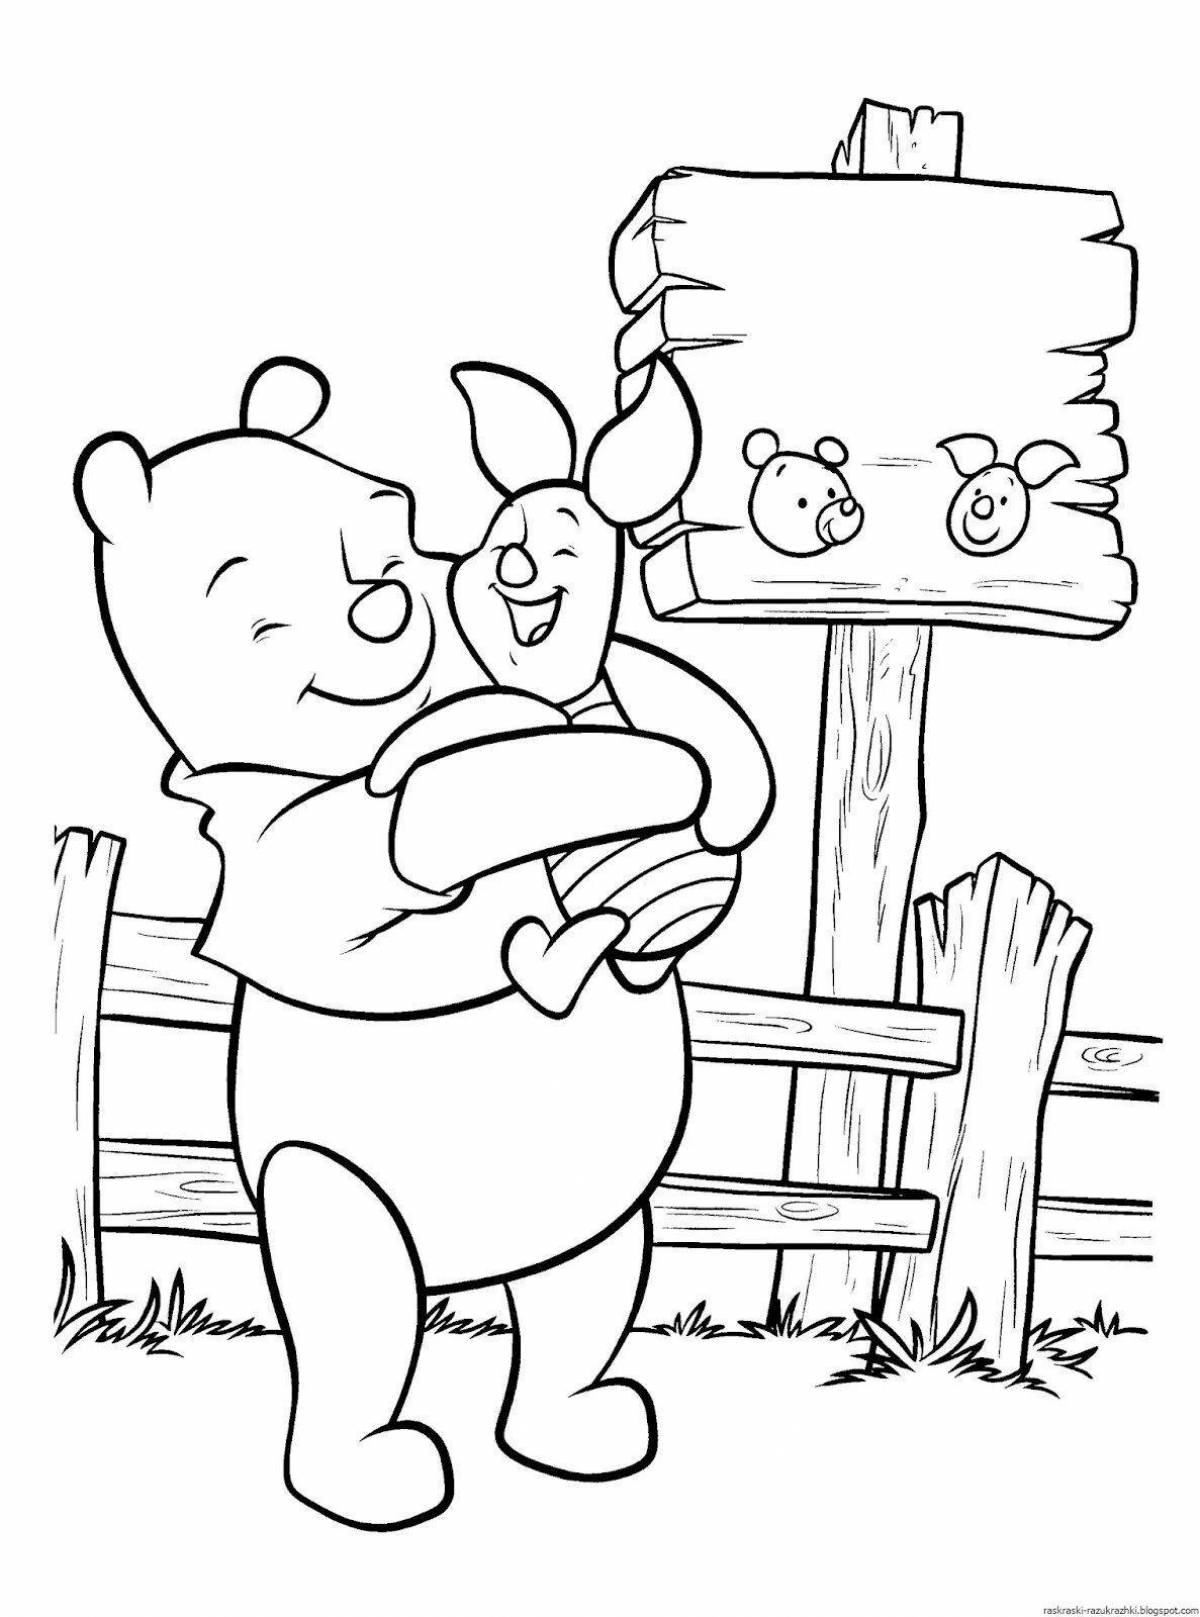 Winnie the Pooh funny coloring book for kids